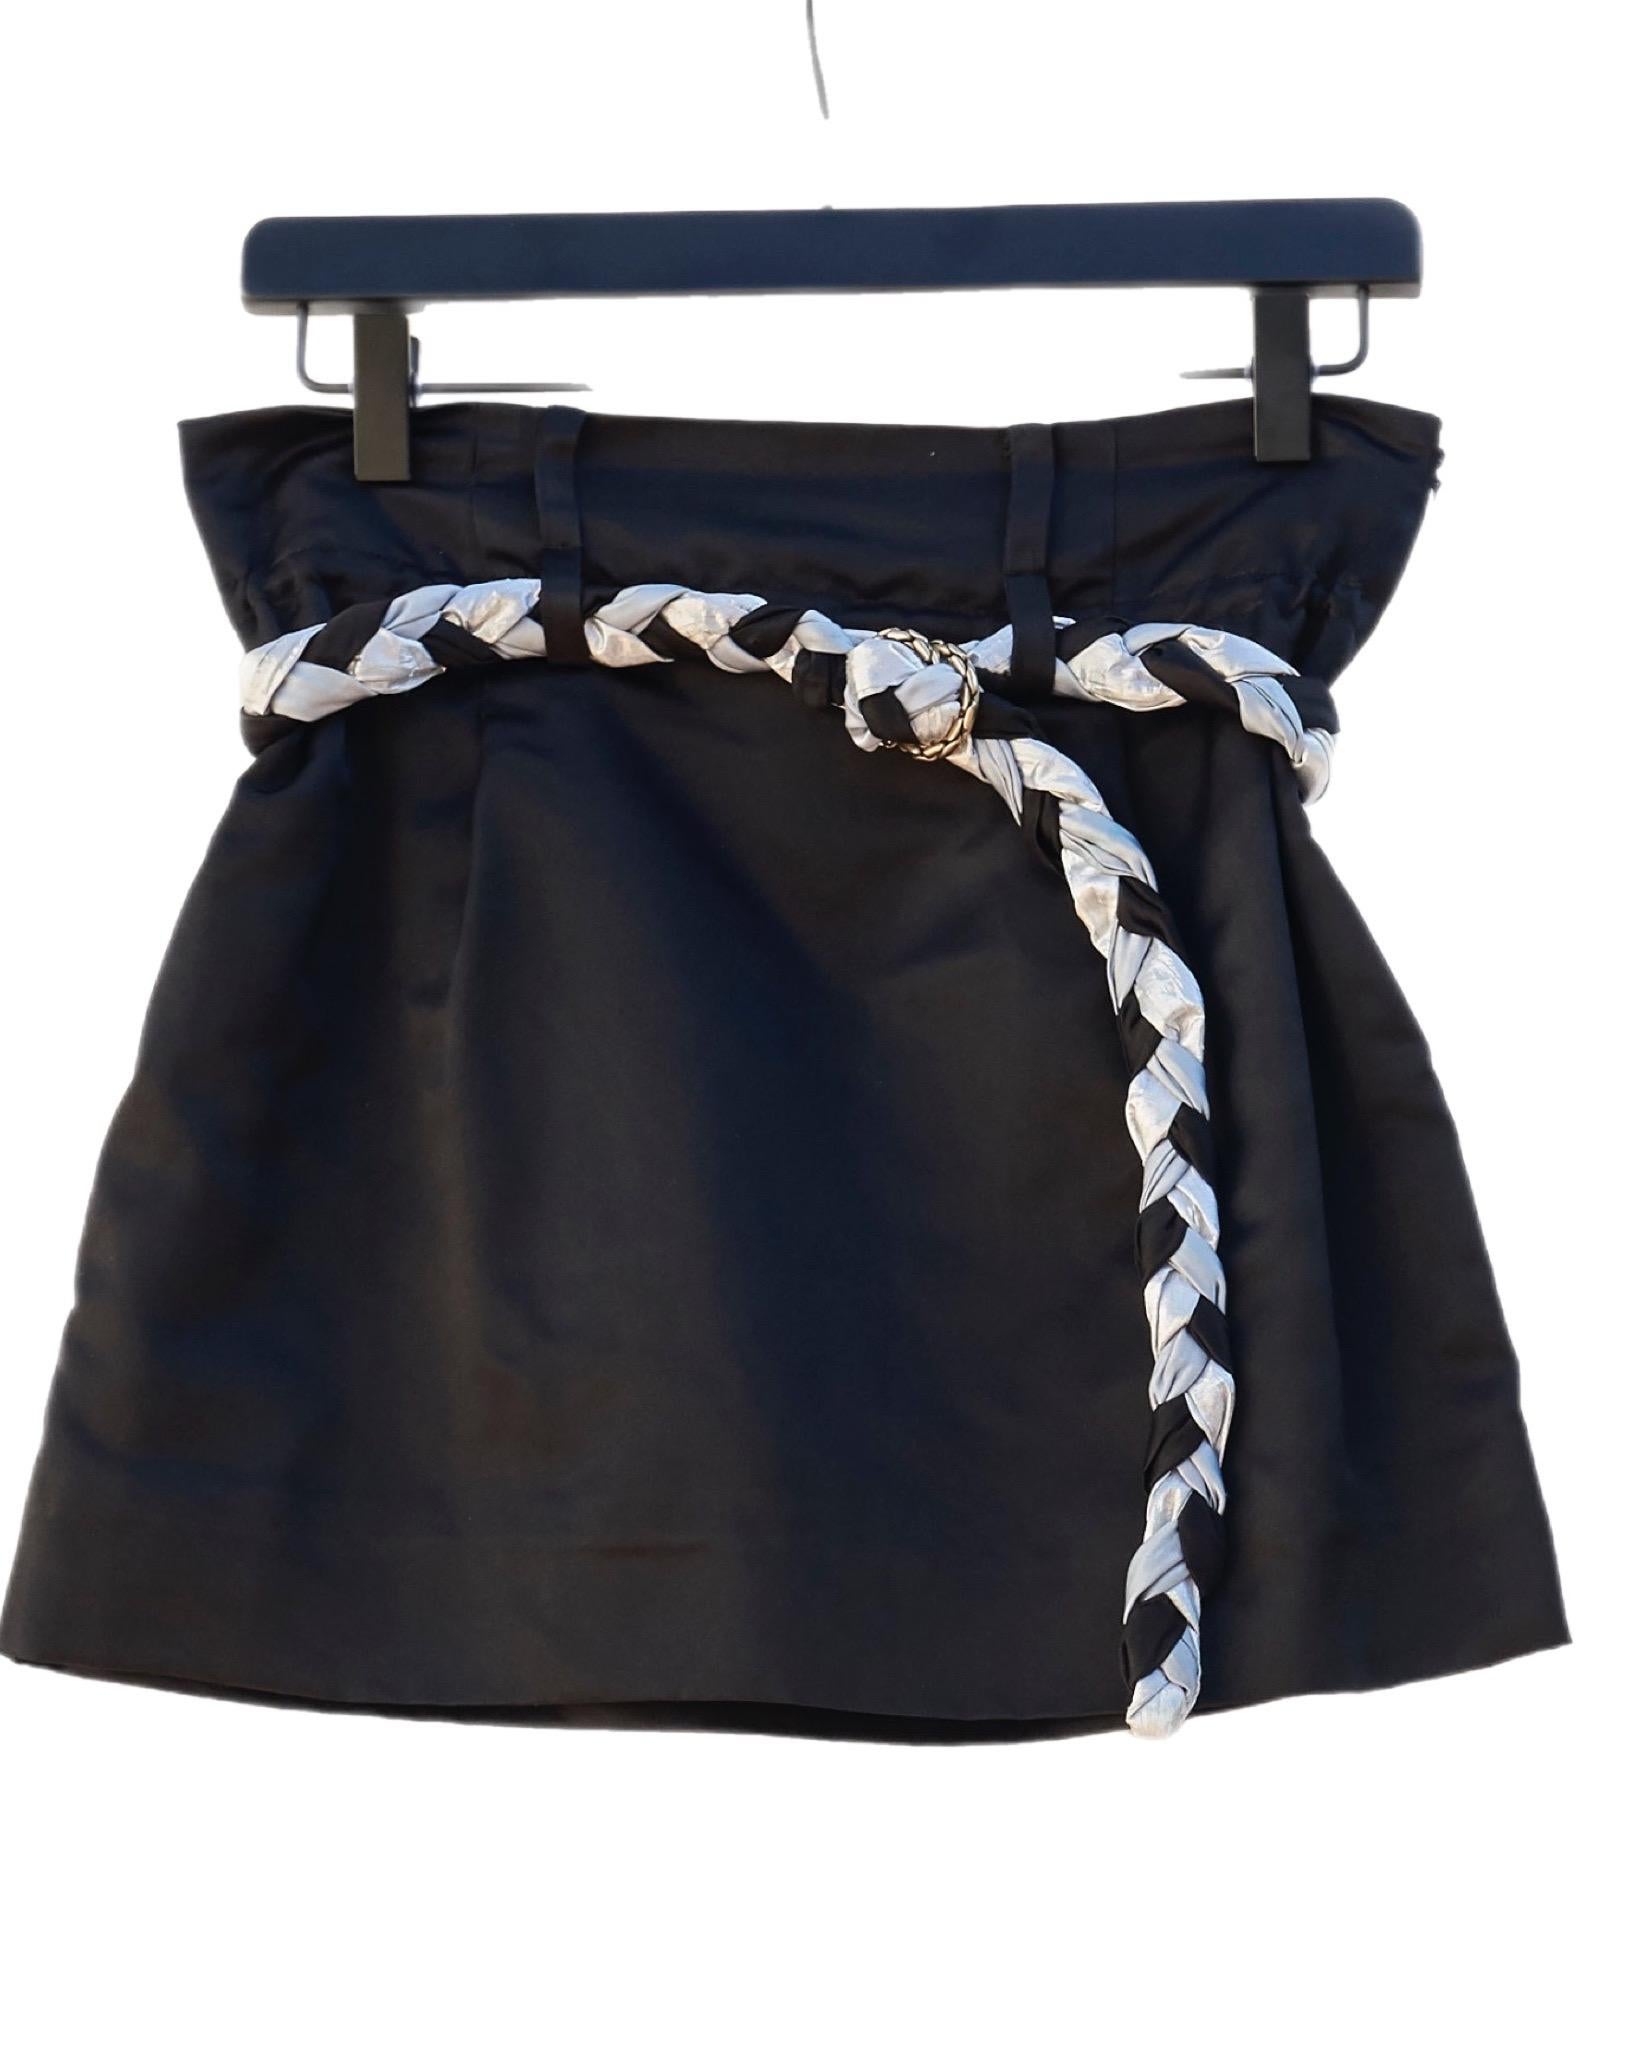 Mini Skirt Black Duchesse Satin Silk Braided Belt X Small In New Condition For Sale In Los Angeles, CA